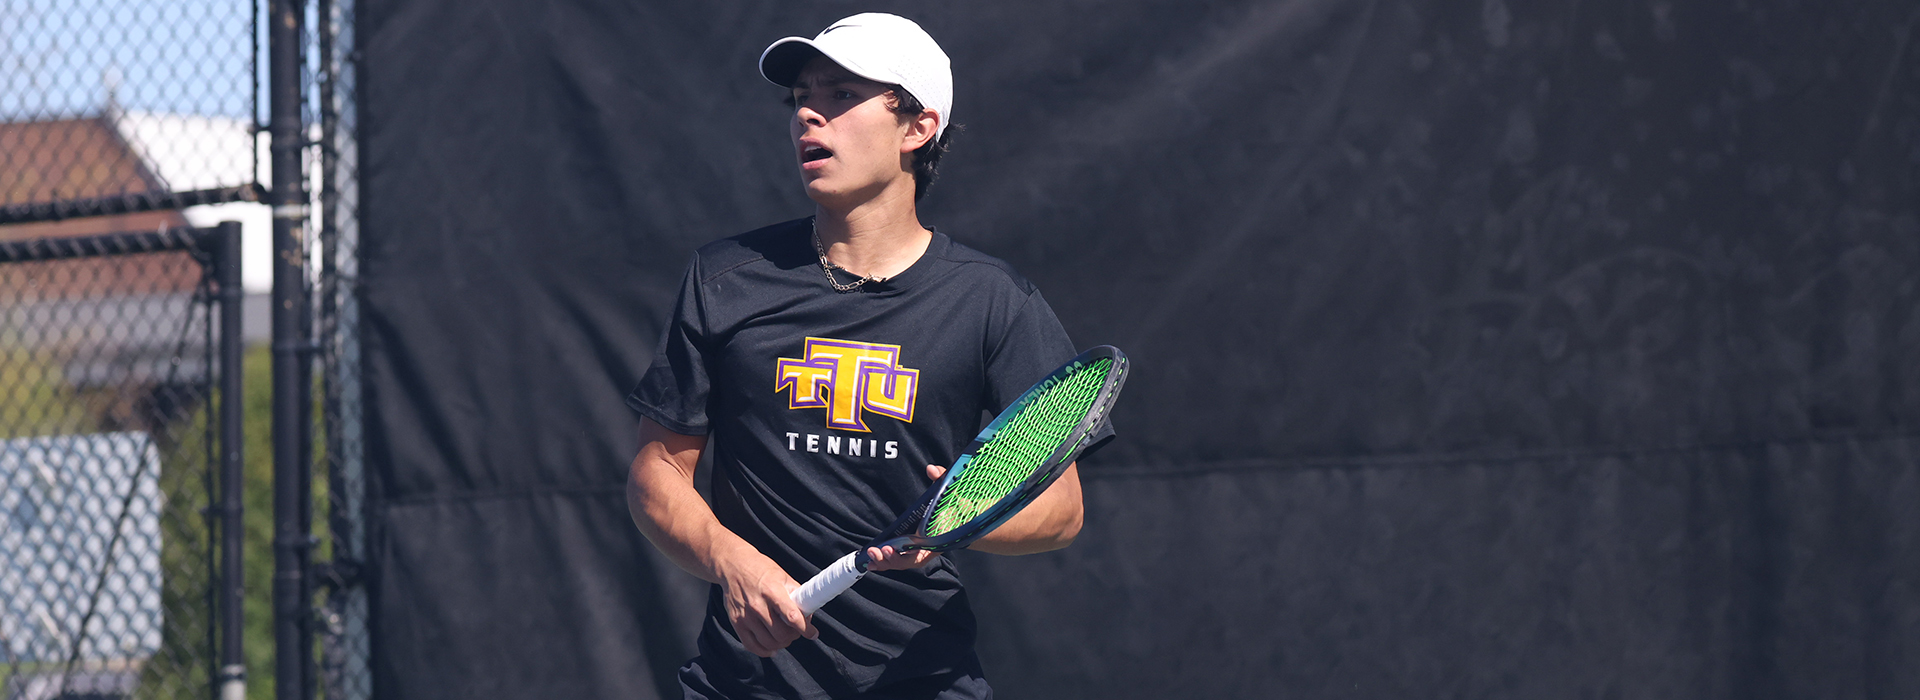 Tech tennis edged 4-3 by Belmont in Saturday meeting in Music City